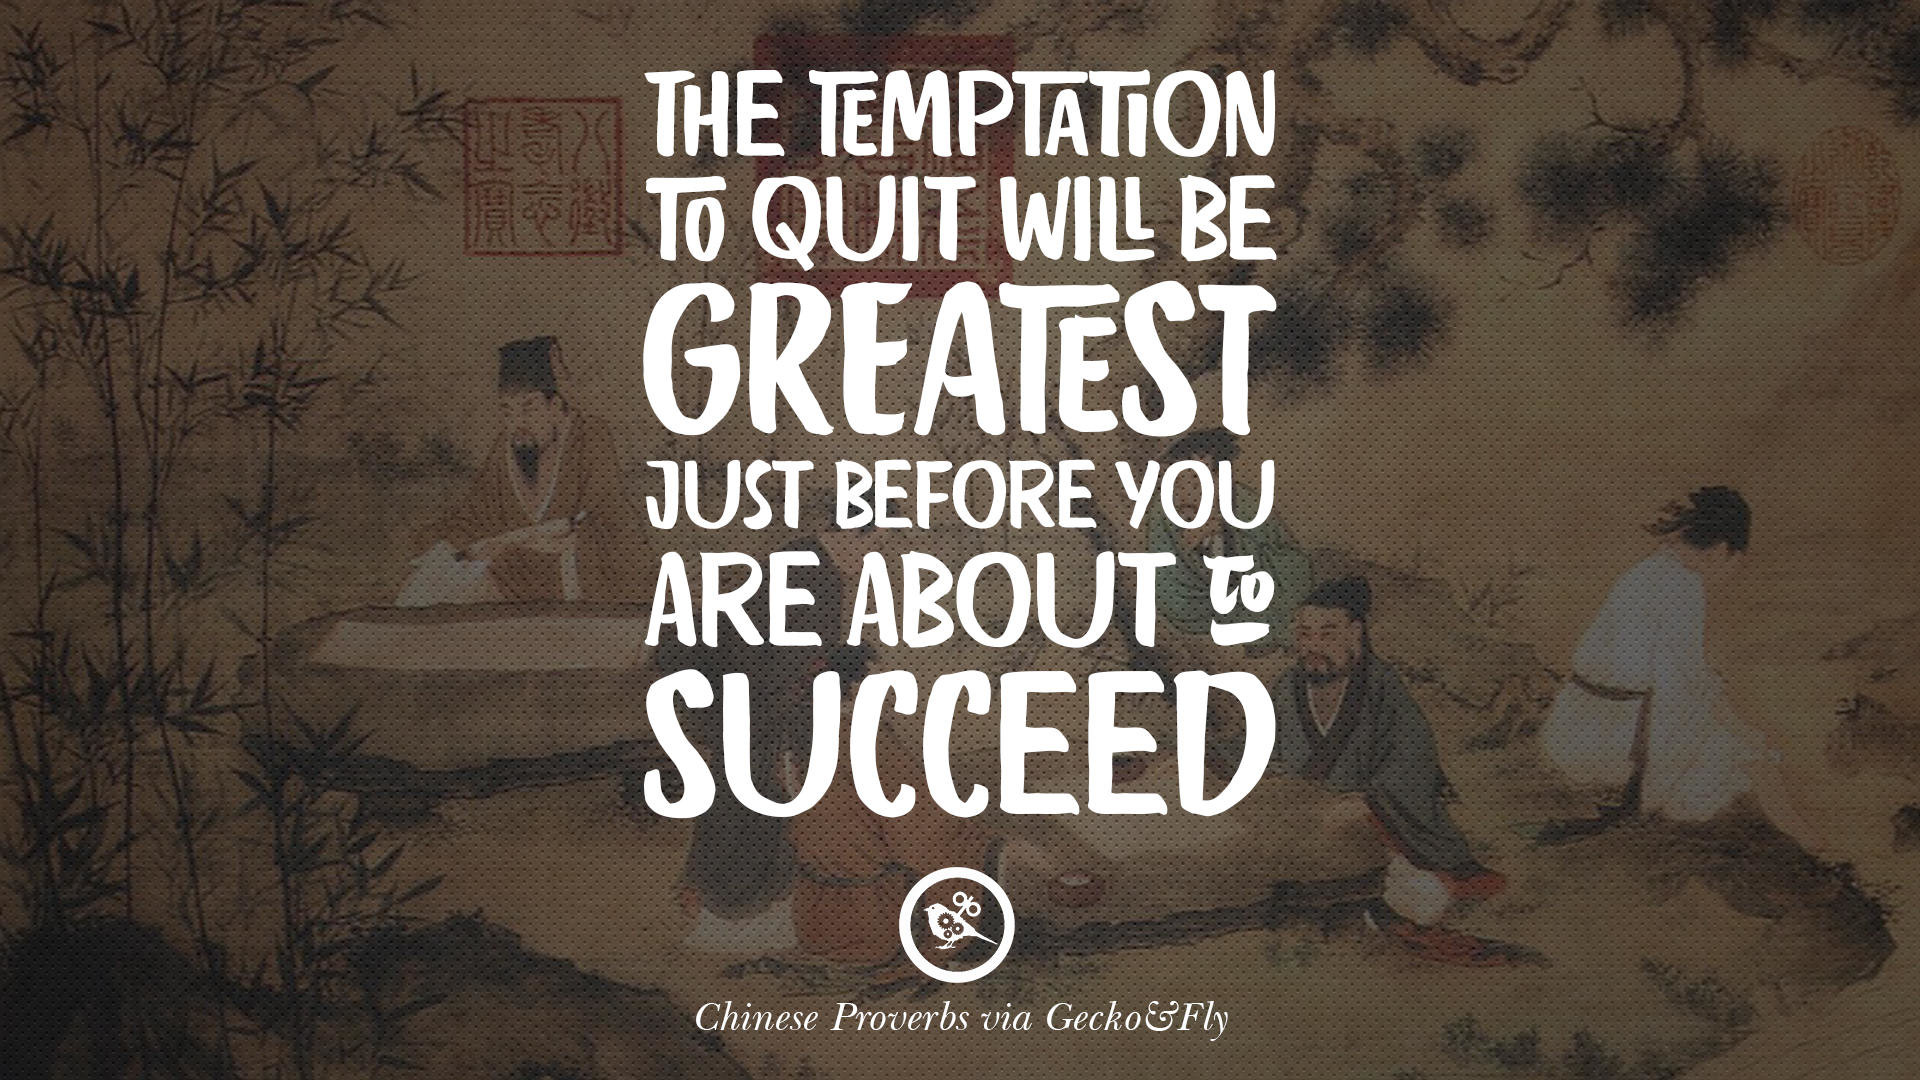 1920x1080 The temptation to quit will be greatest just before you are about to  succeed.